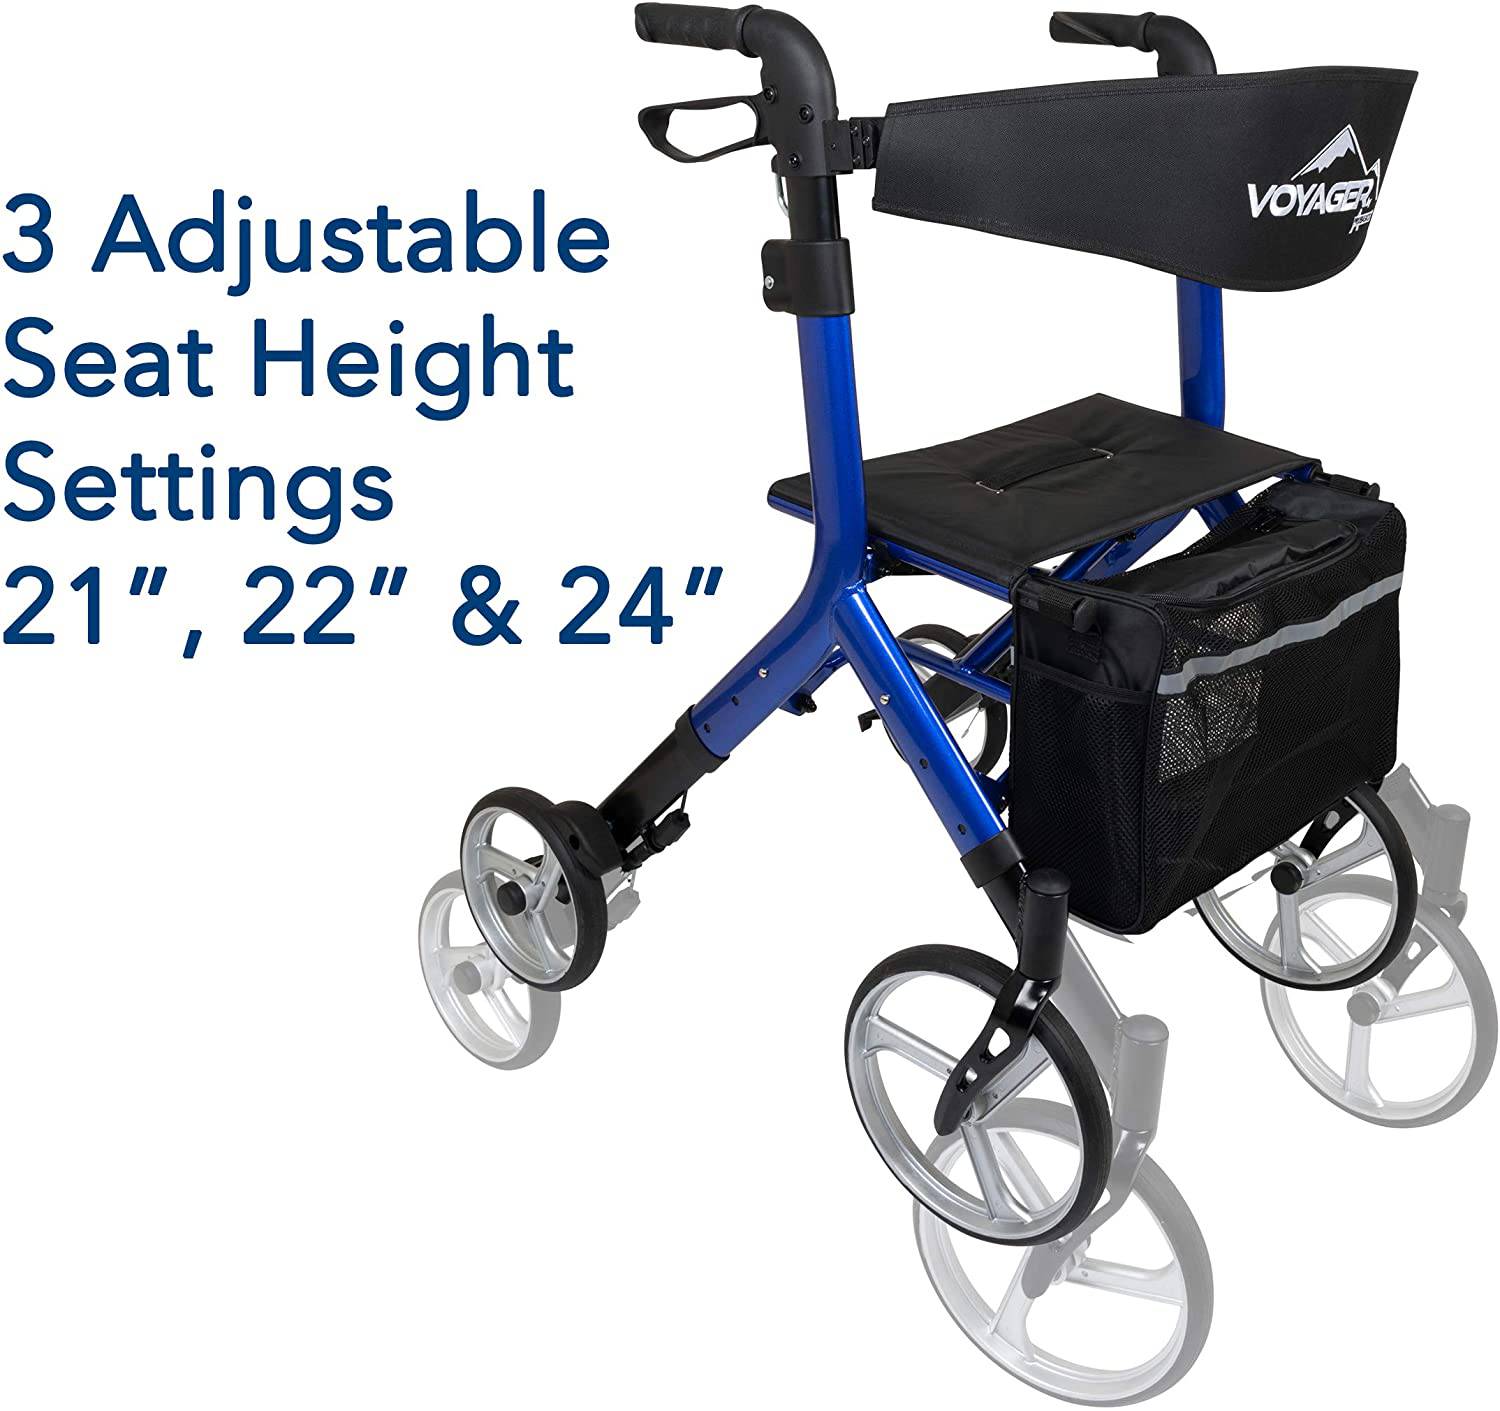 ProBasics Voyager Euro Walker with Seat - Carex Health Brands